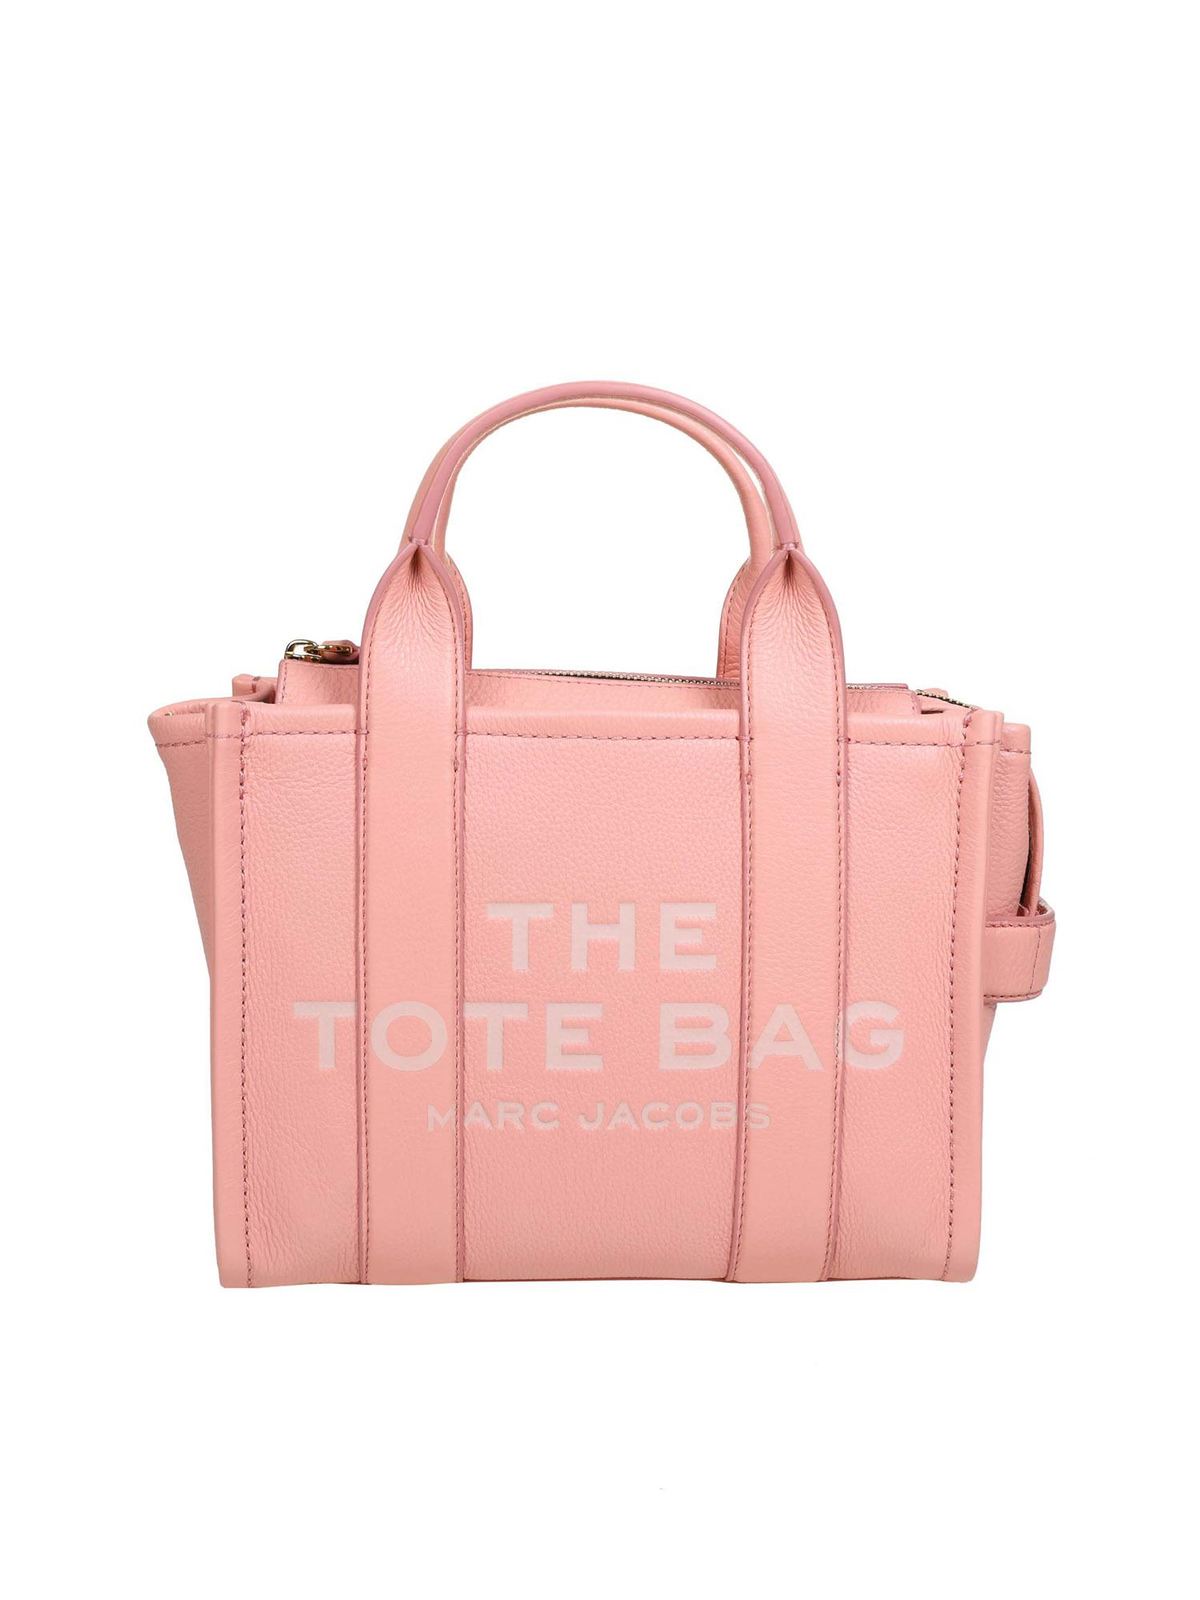 MARC JACOBS MINI TRAVELER TOTE BAG IN SOUTHERN PEACH COLO